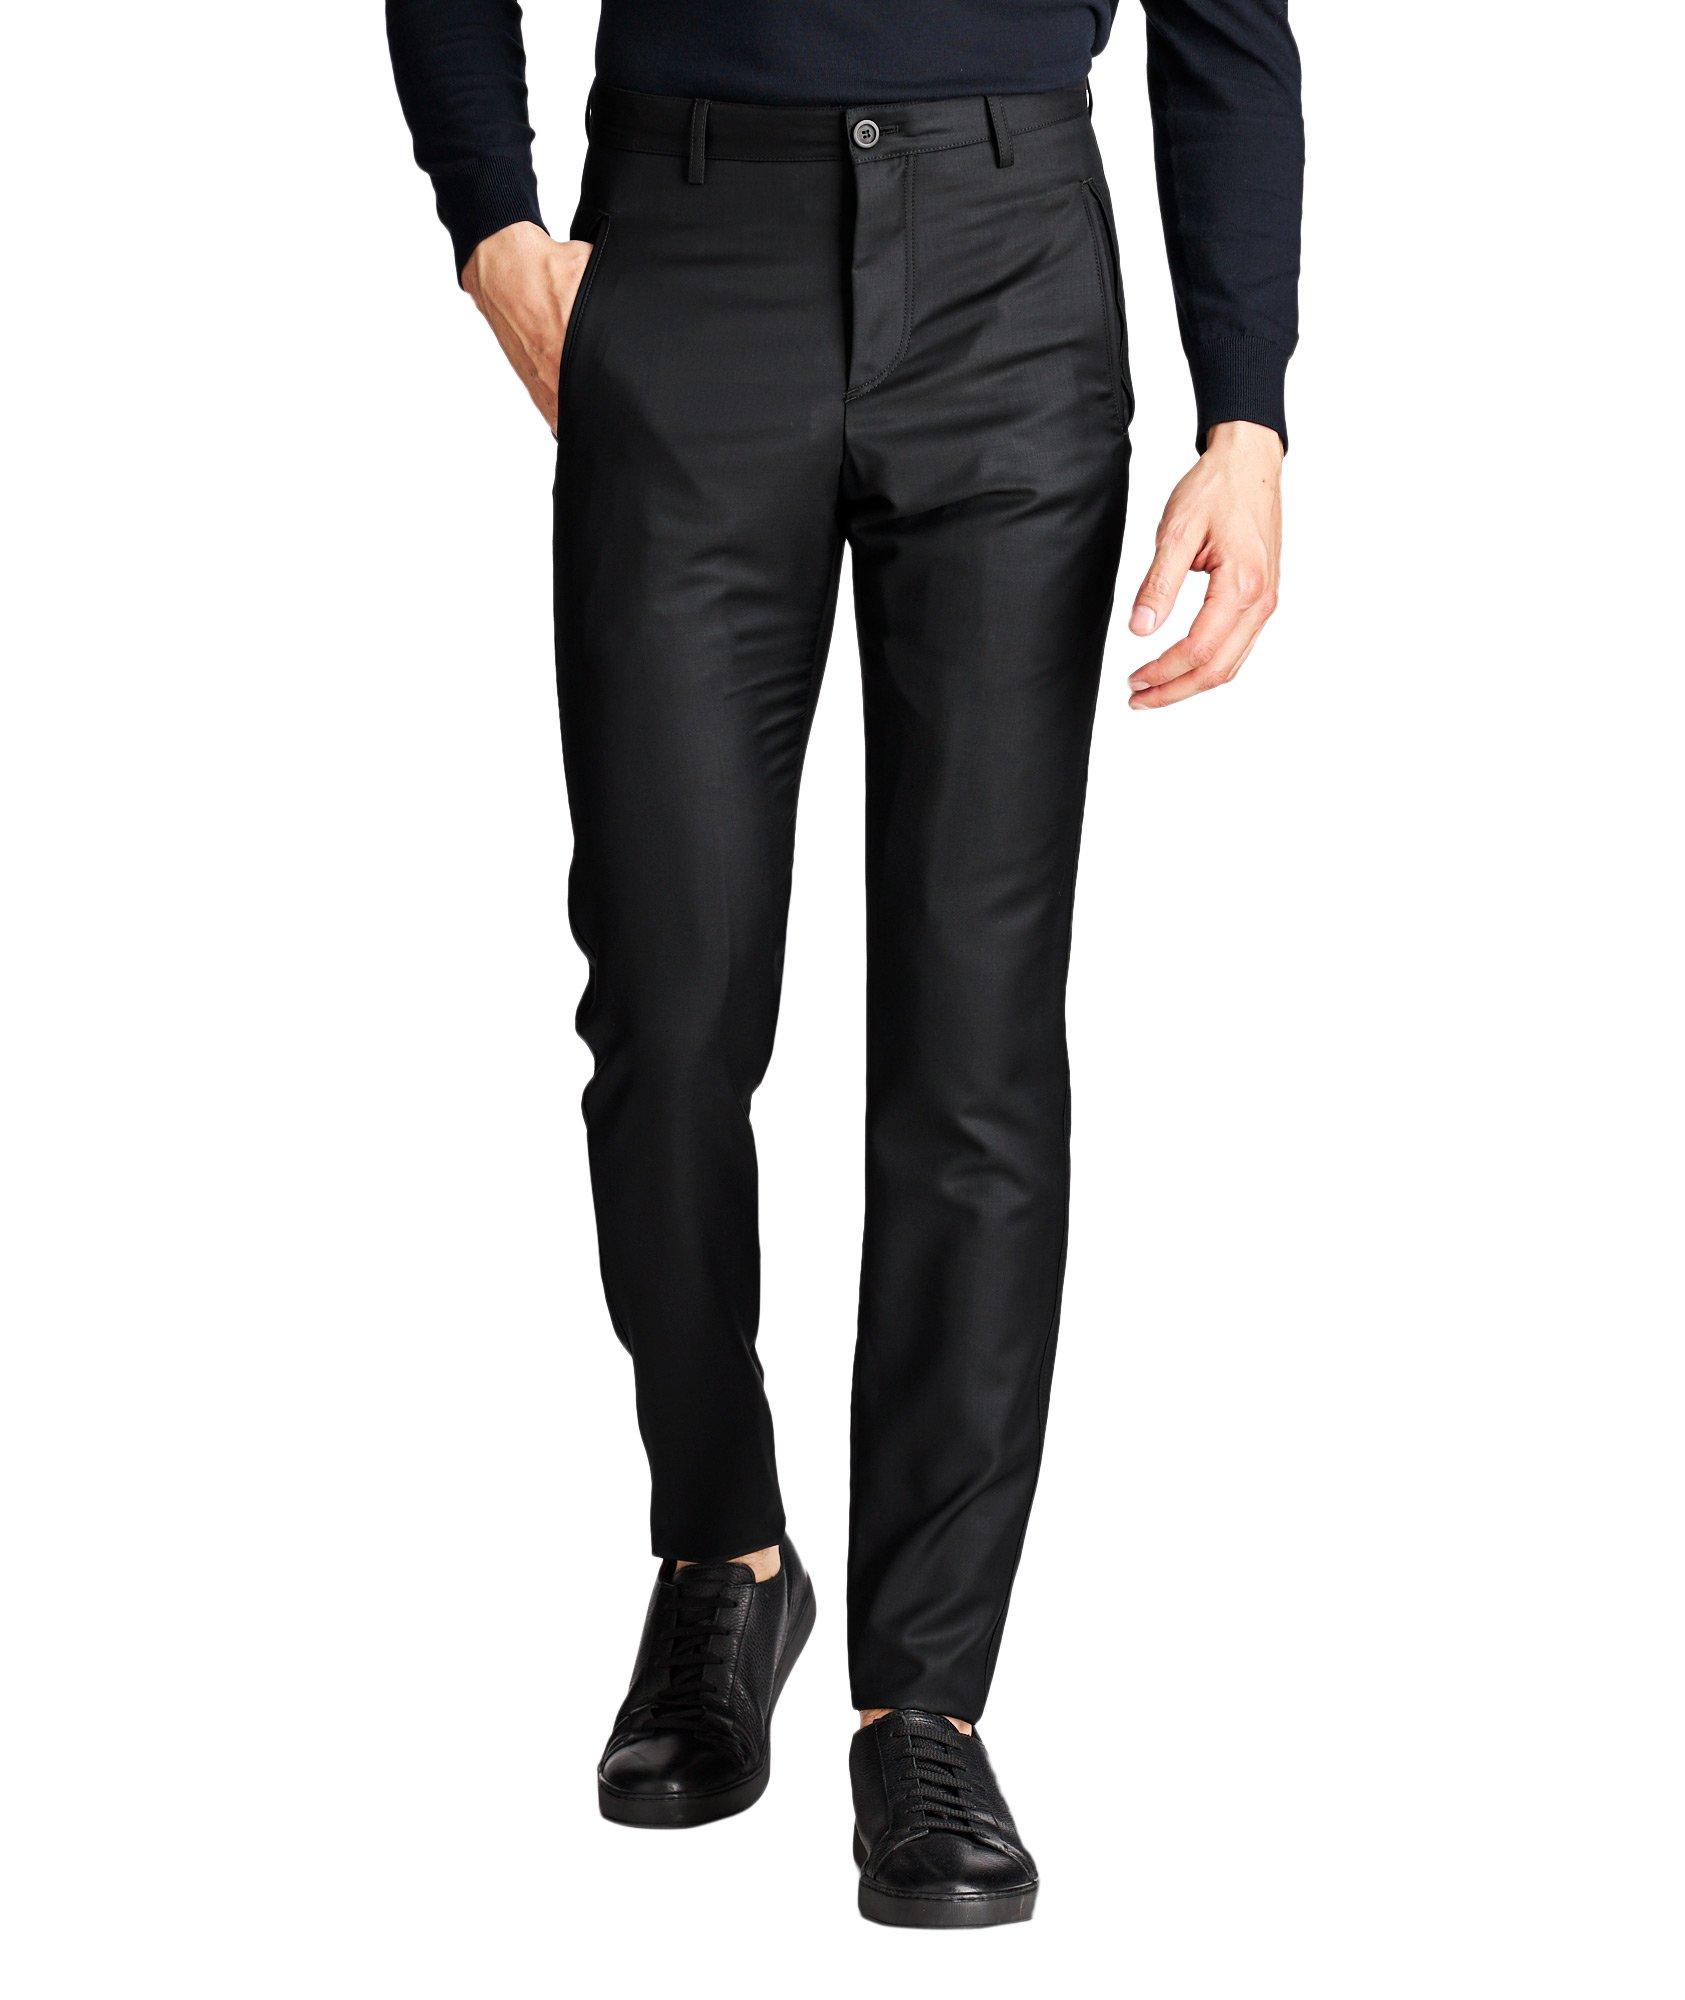 Virgin Wool-Cashmere Trousers image 0